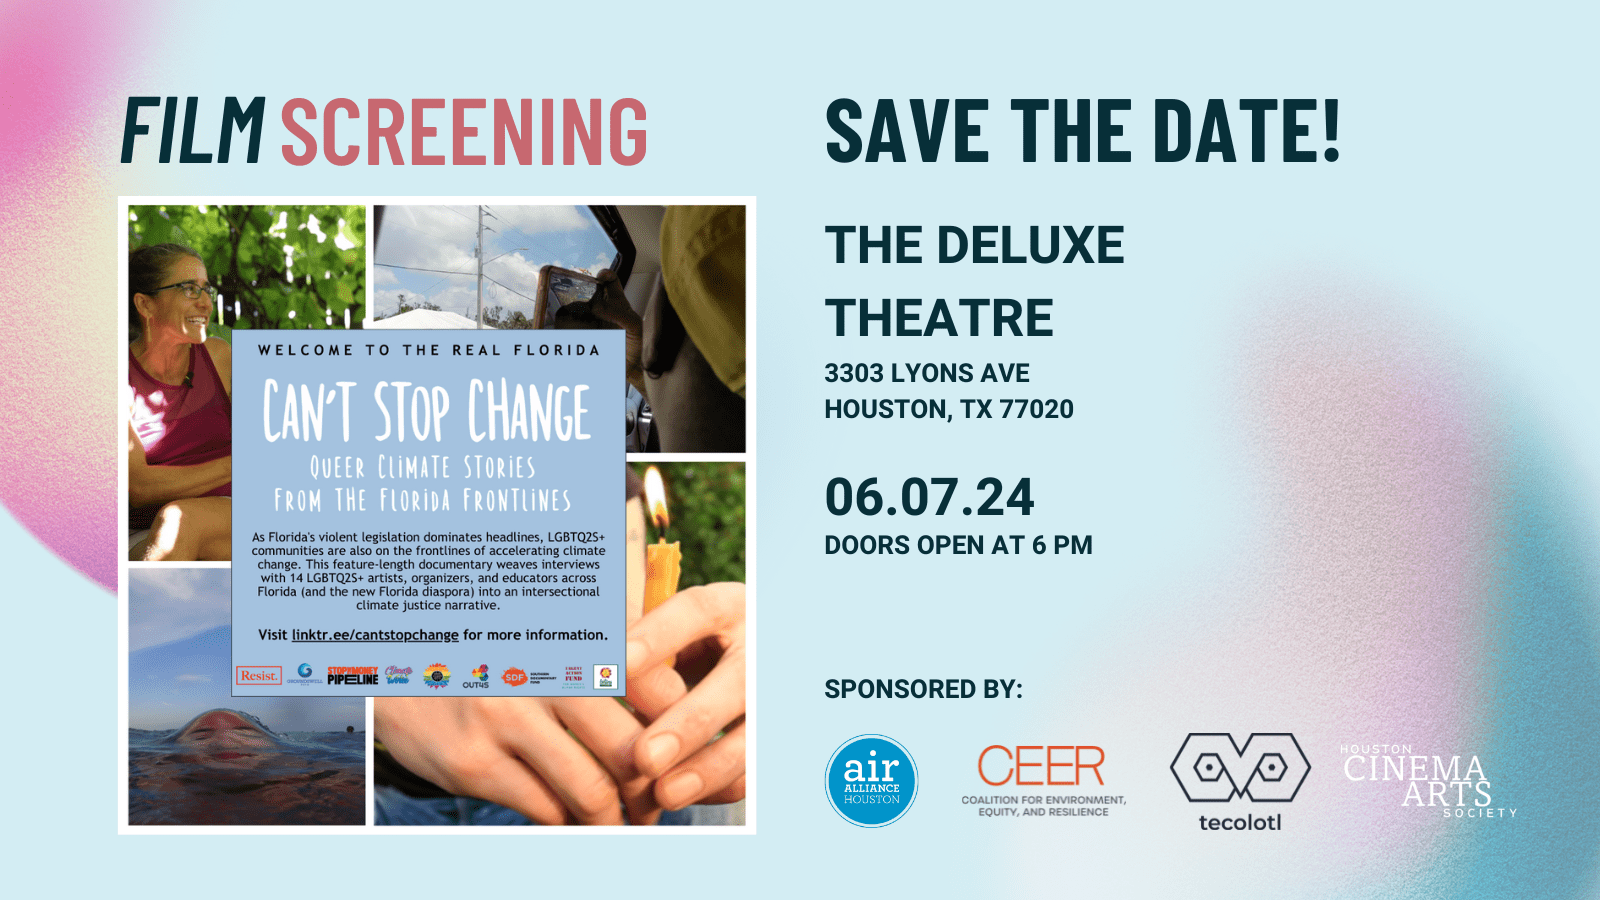 FILM SCREENING: SAVE THE DATE! The DeLUXE Theatre 330 Lyons Ave. Houston, TX 77020. June 7, 2024. Doors open at 6 PM. Sponsored by CEER, Tecolotl, Houston Cinema Arts Society.